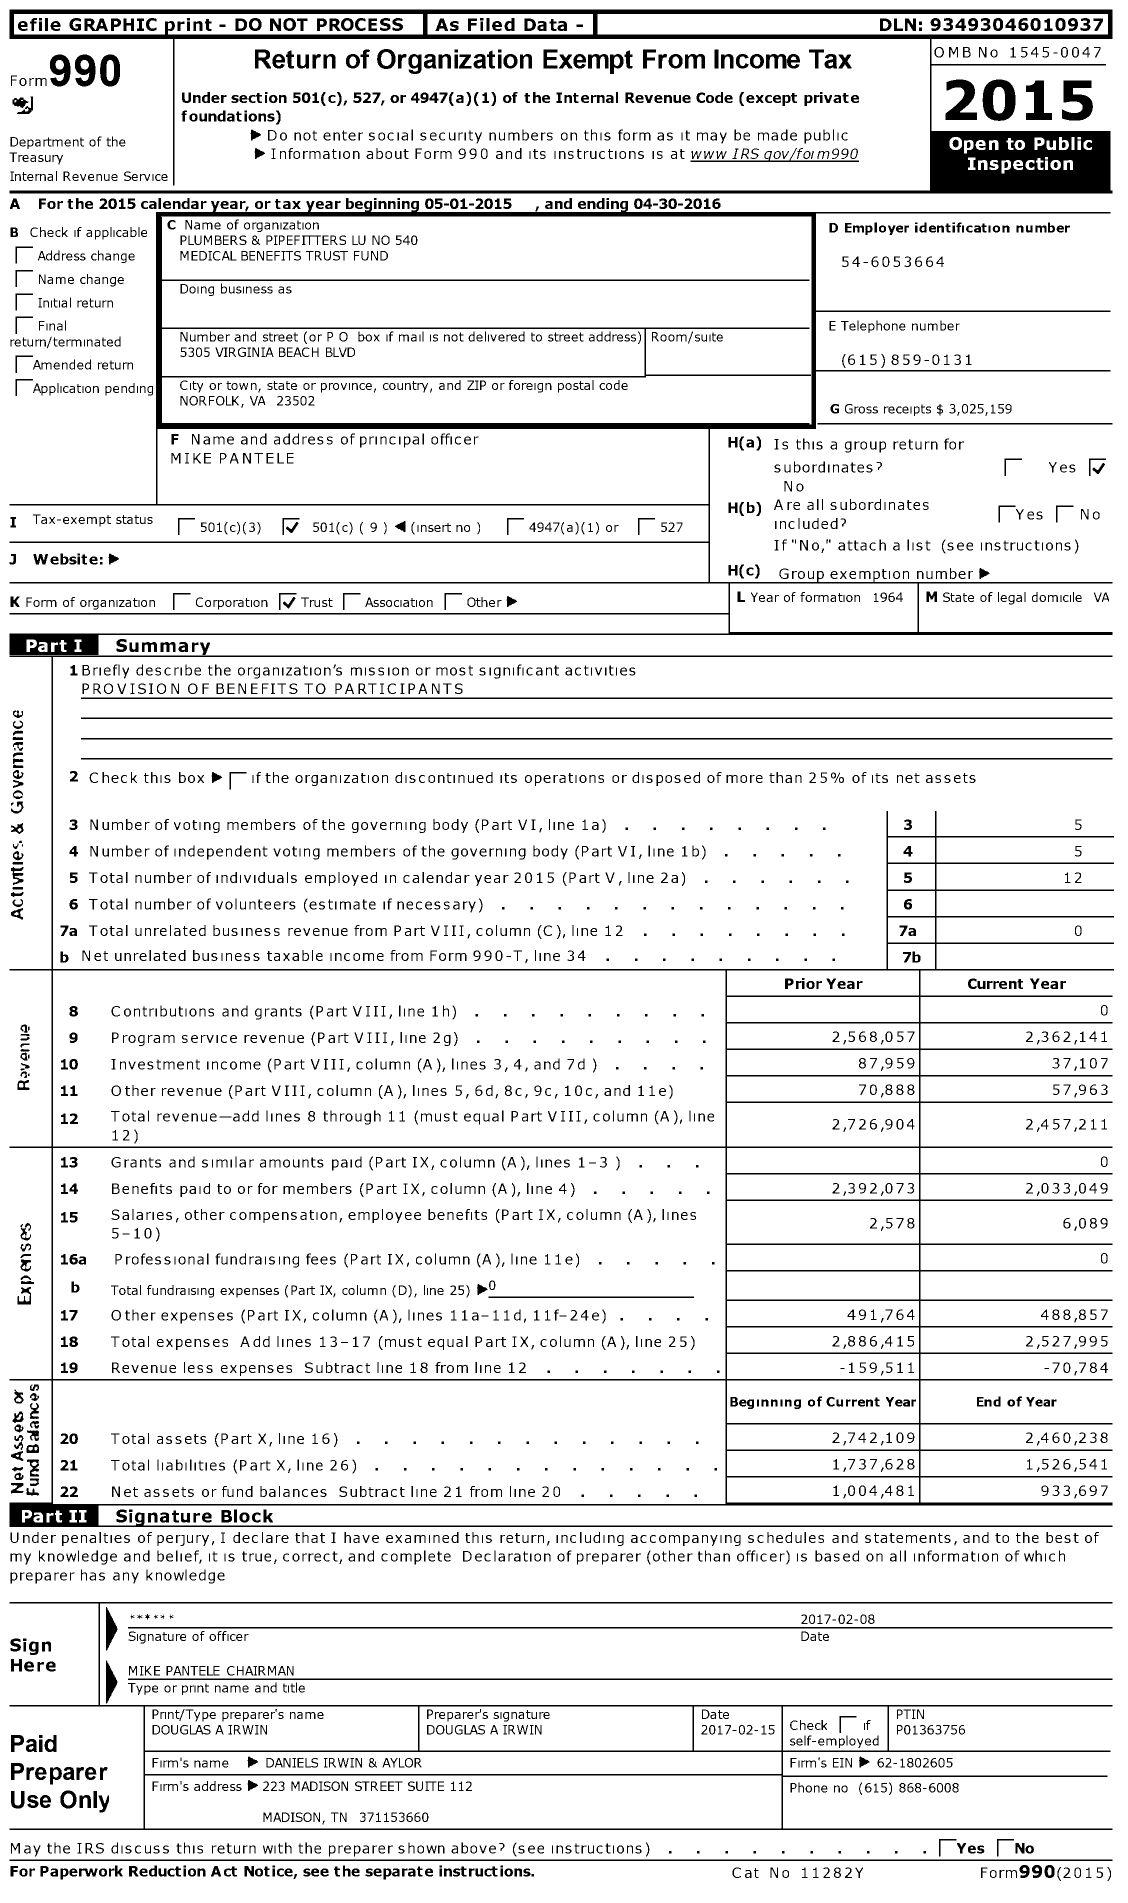 Image of first page of 2015 Form 990O for Plumbers and Pipefitters Lu No 540 Medical Benefits Trust Fund